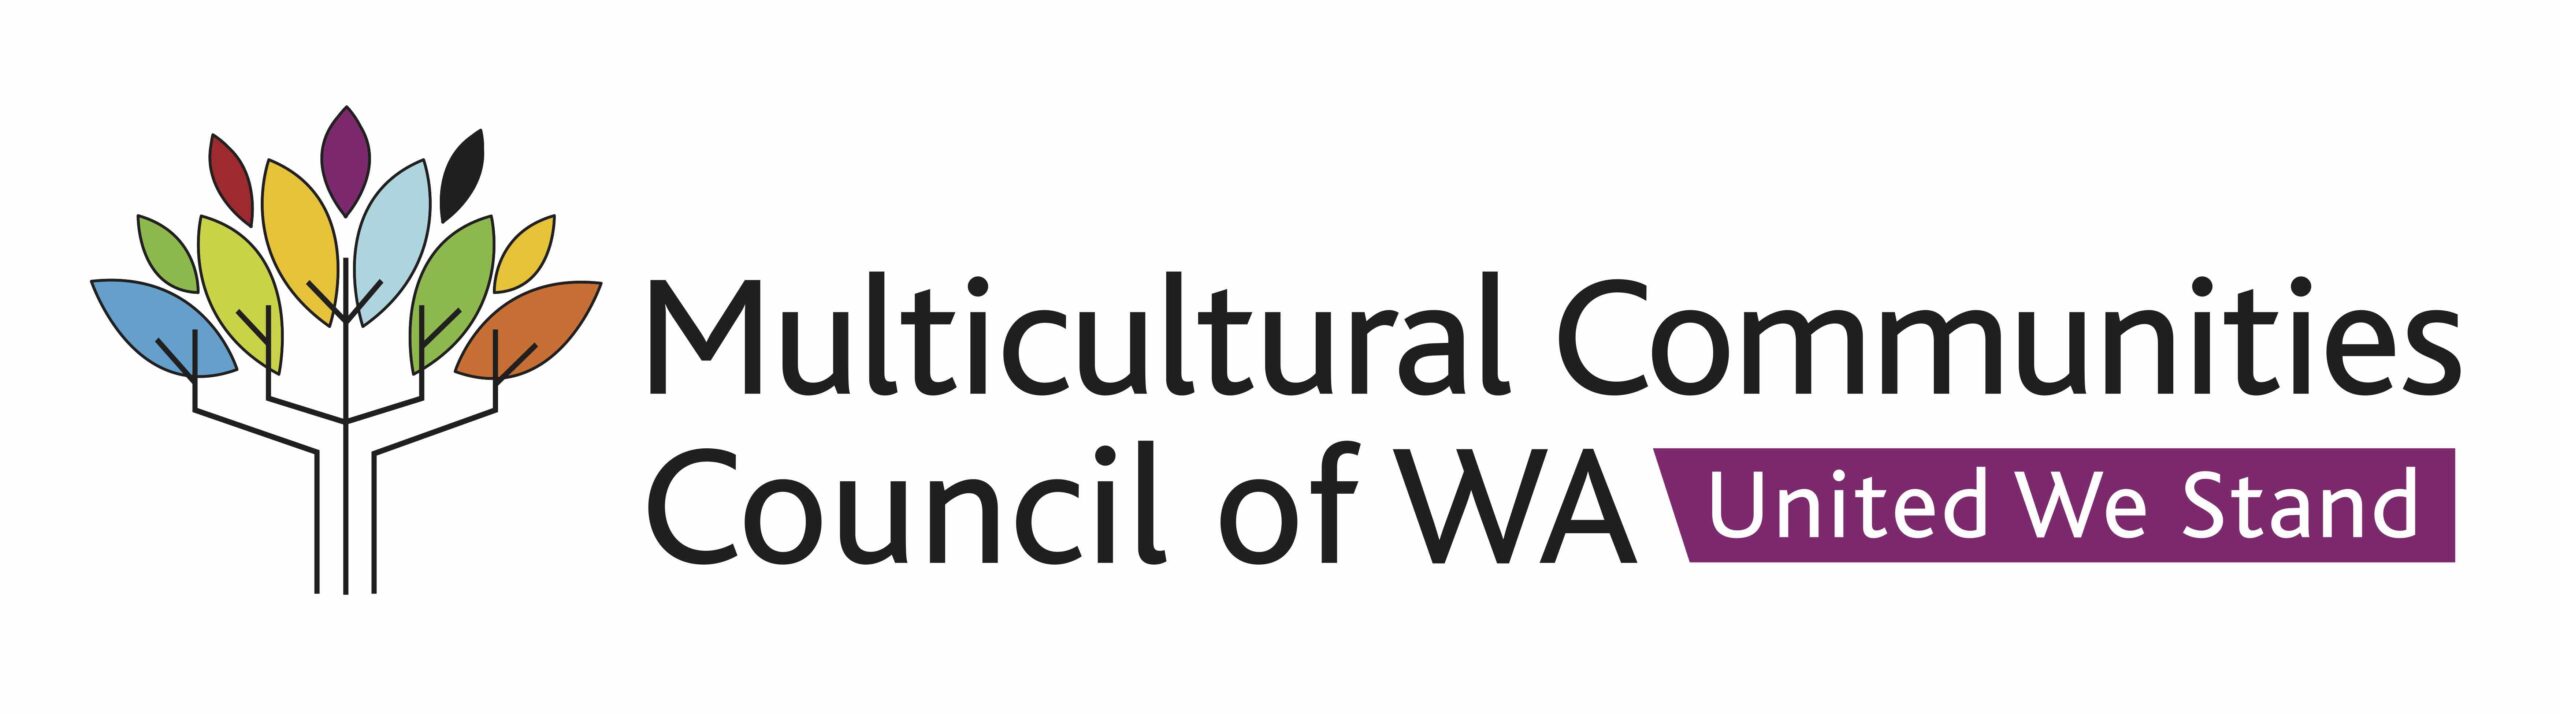 The Multicultural Communities Council of WA INC. logo